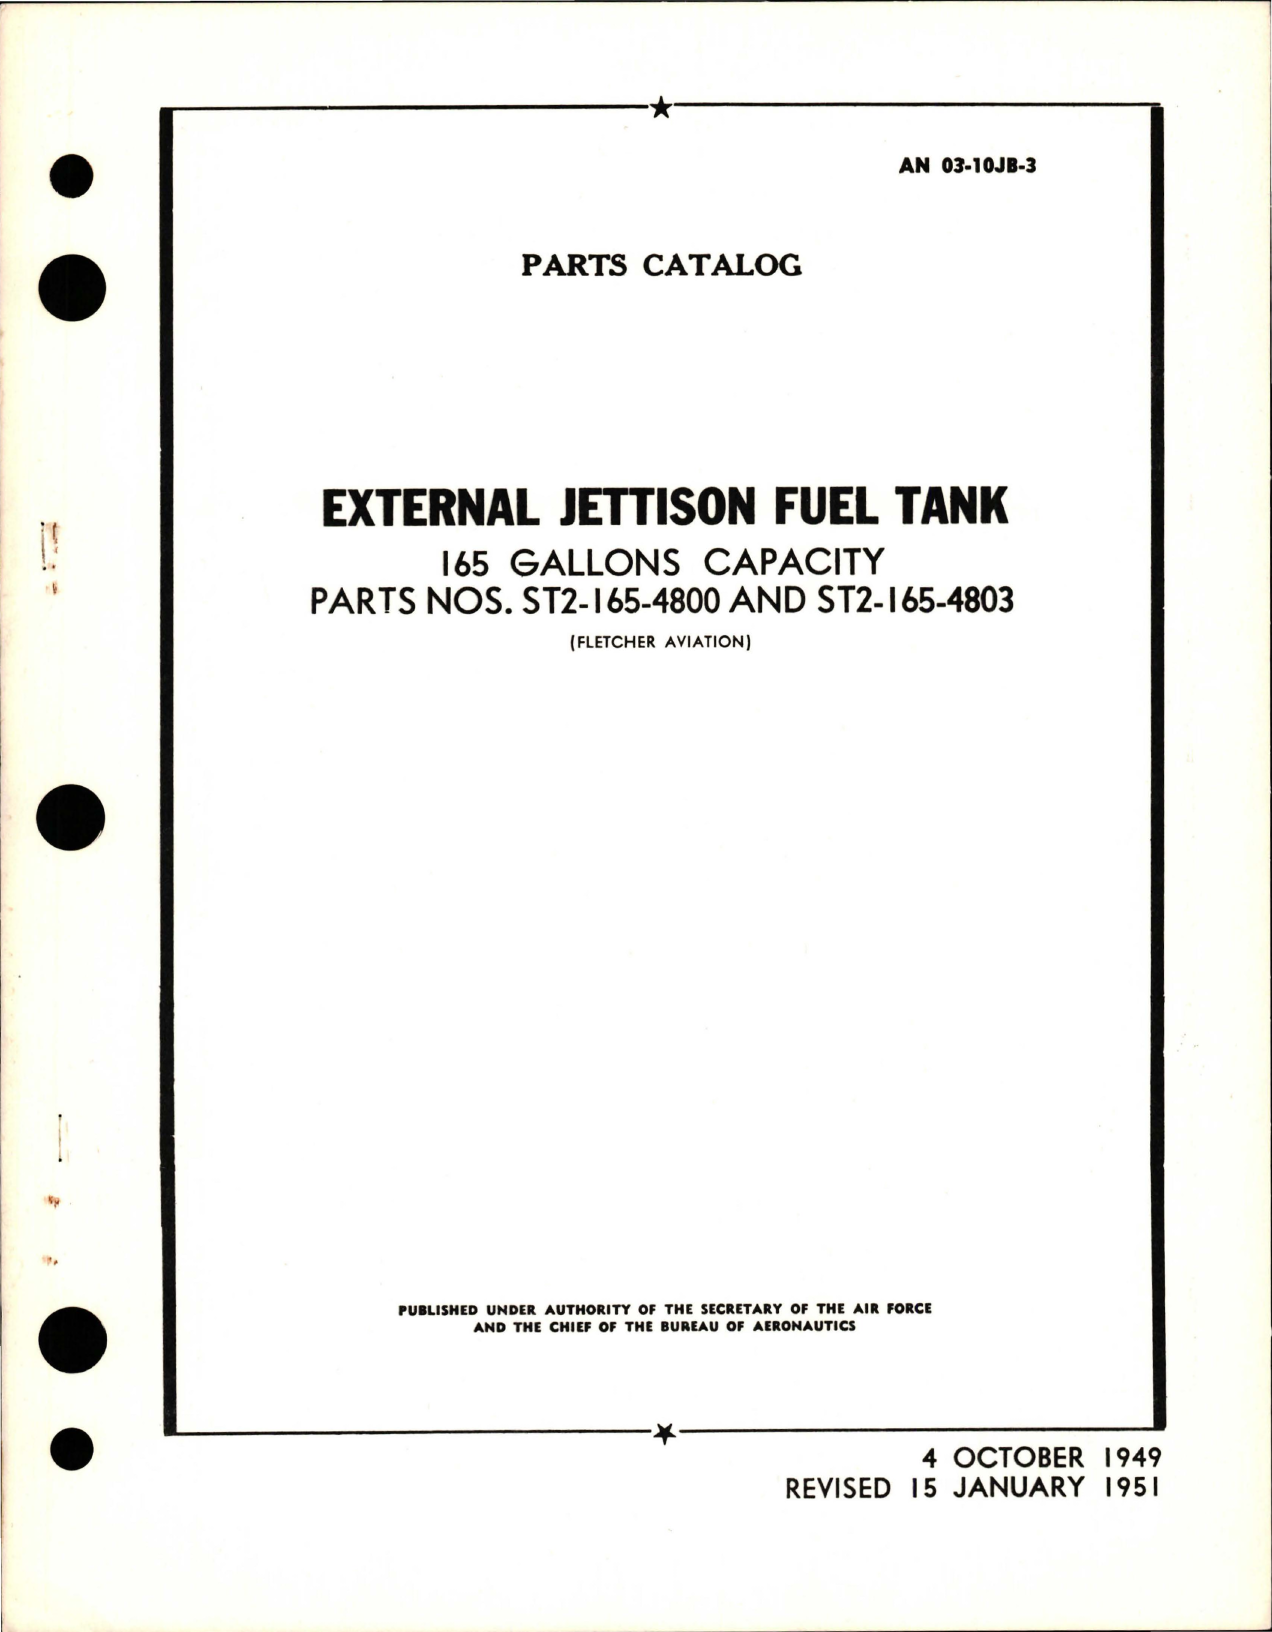 Sample page 1 from AirCorps Library document: Parts Catalog for External Jettison Fuel Tank - 165 Gallons Capacity - Parts ST2-165-4800 and ST2-165-4803